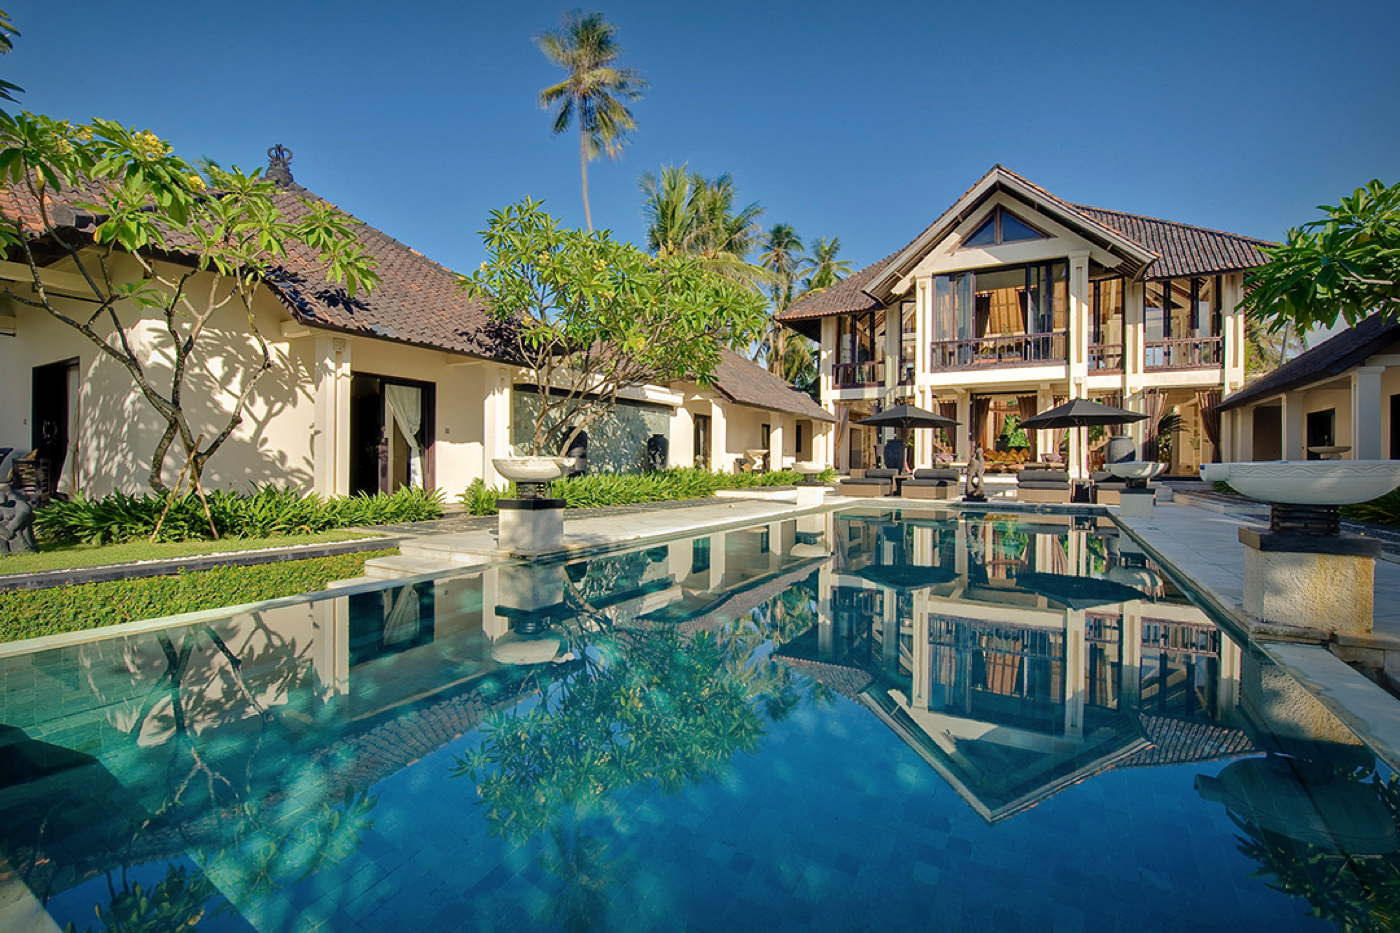 Exclusive holiday rental villa with pool and service in Bali